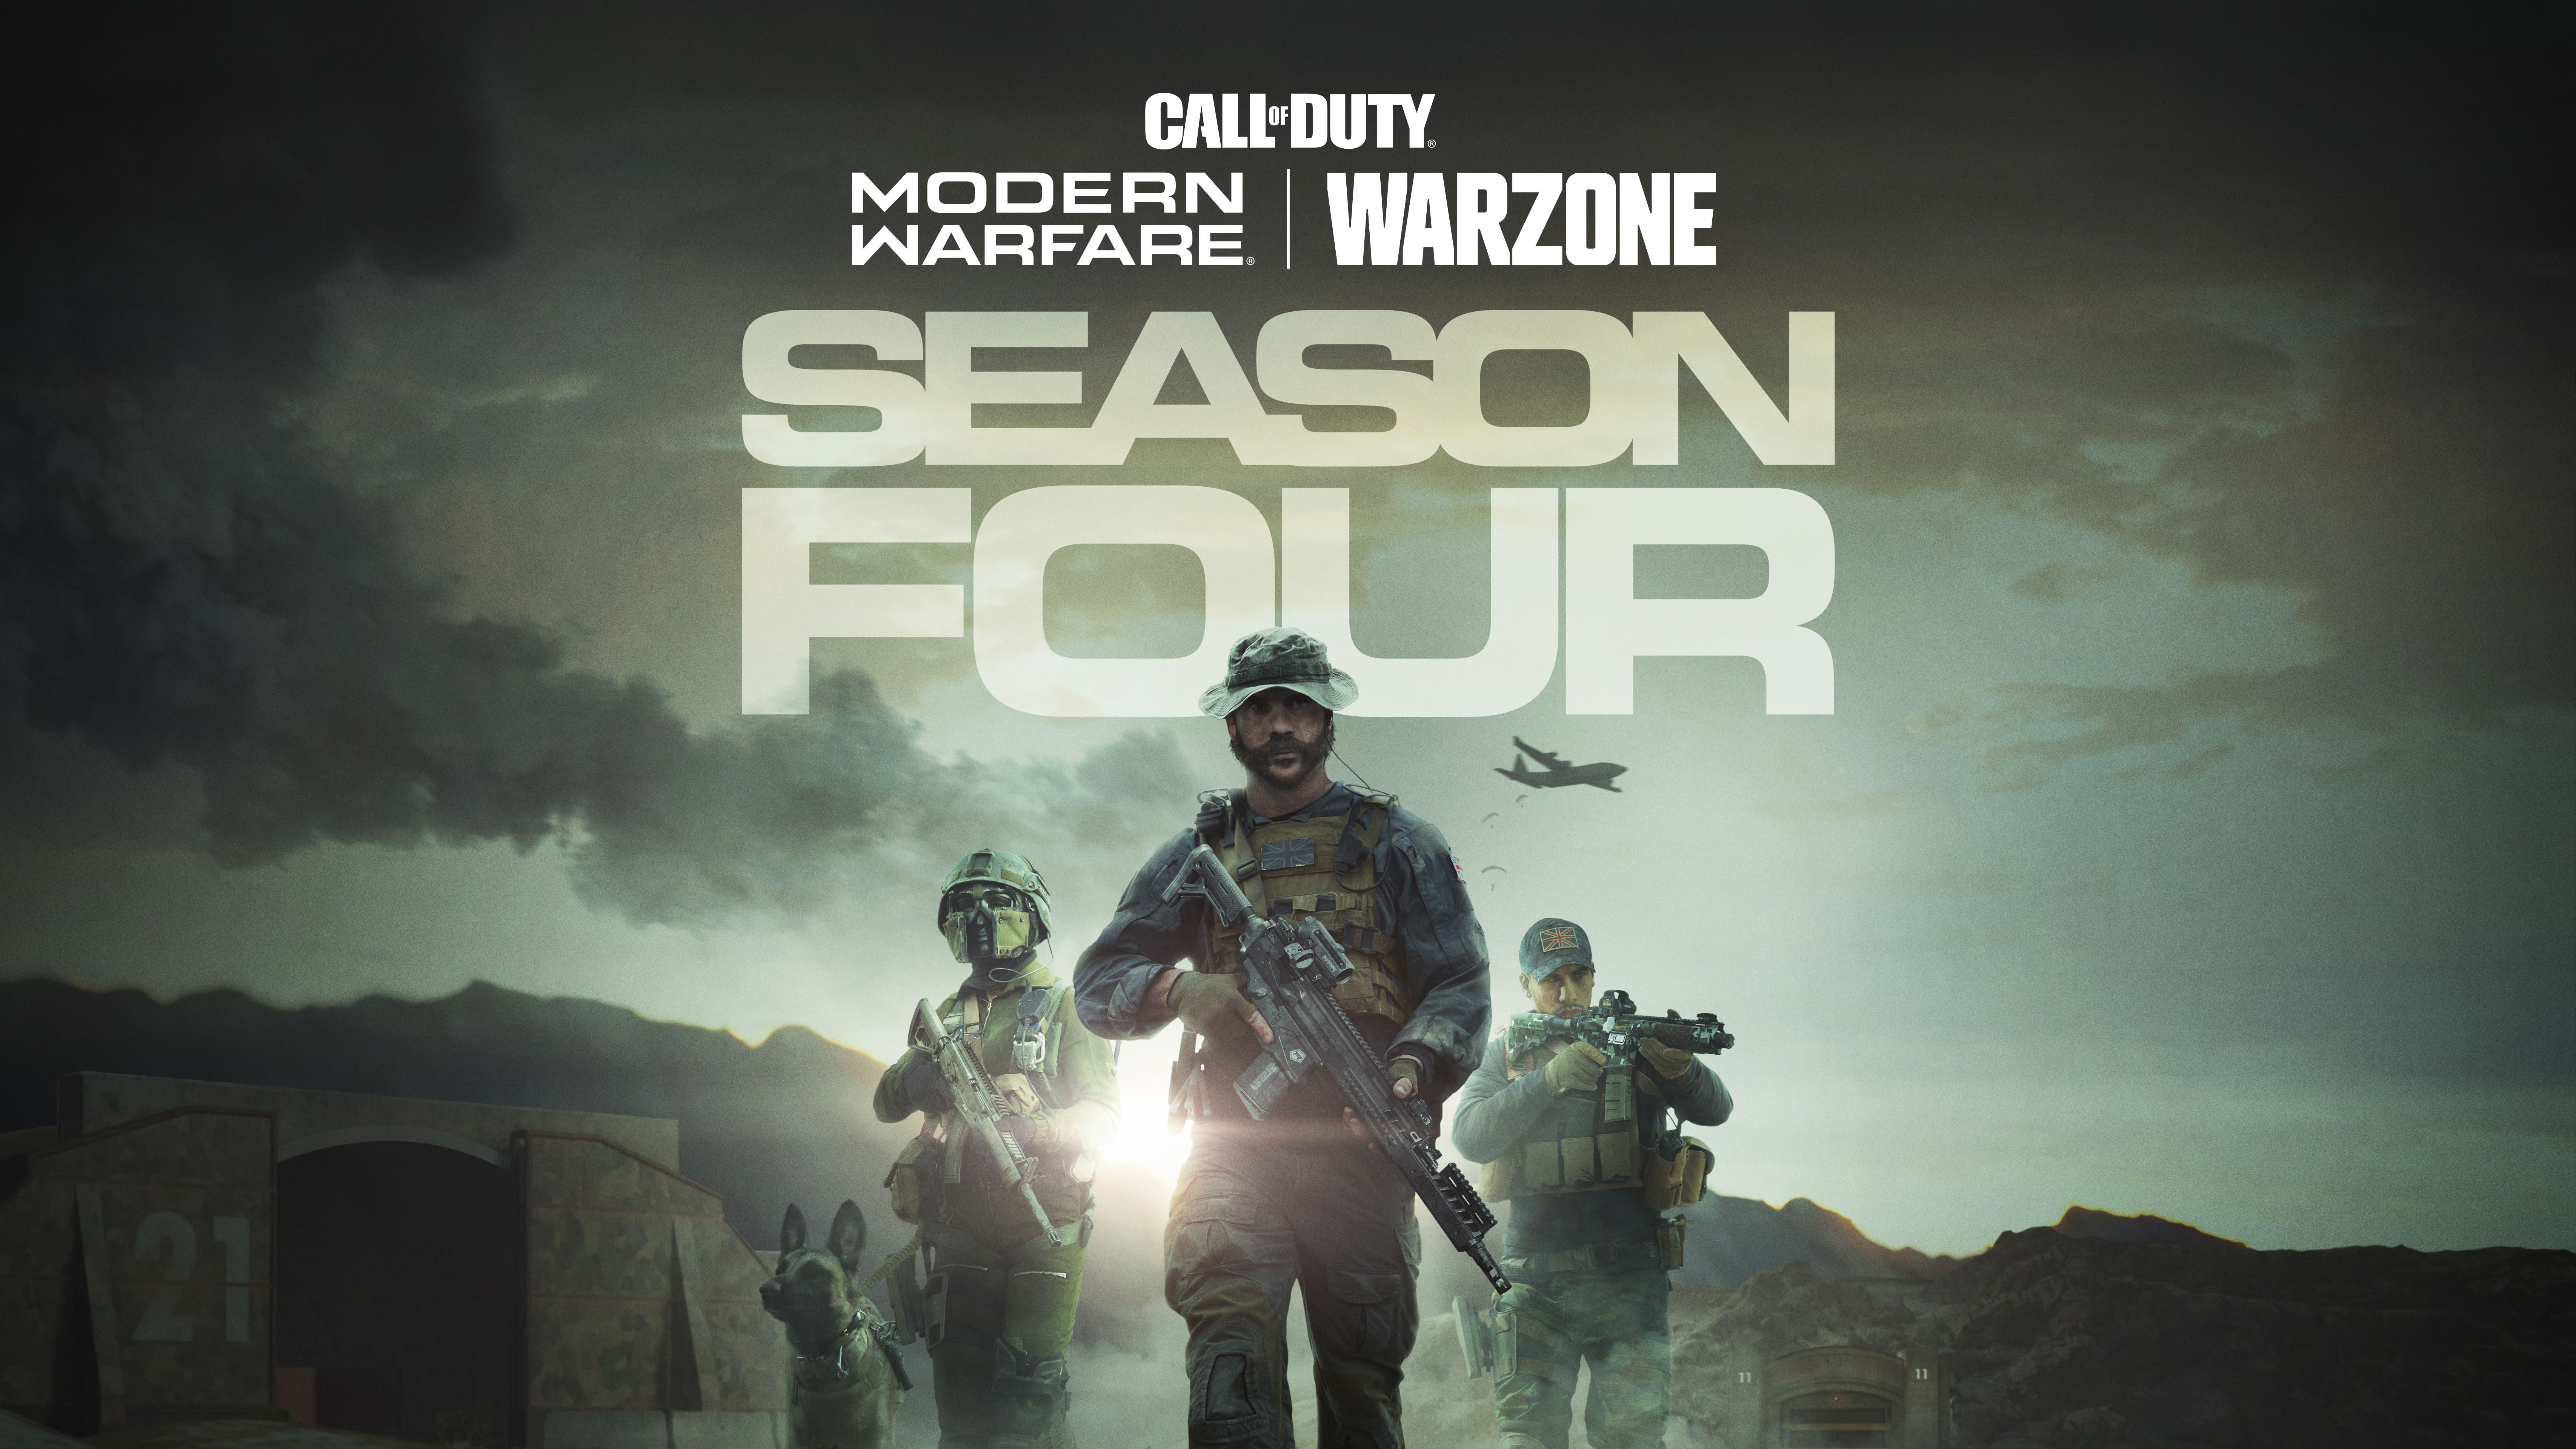 Call Of Duty Modern Warfare Season HD Games, 4k Wallpaper, Image, Background, Photo and Picture